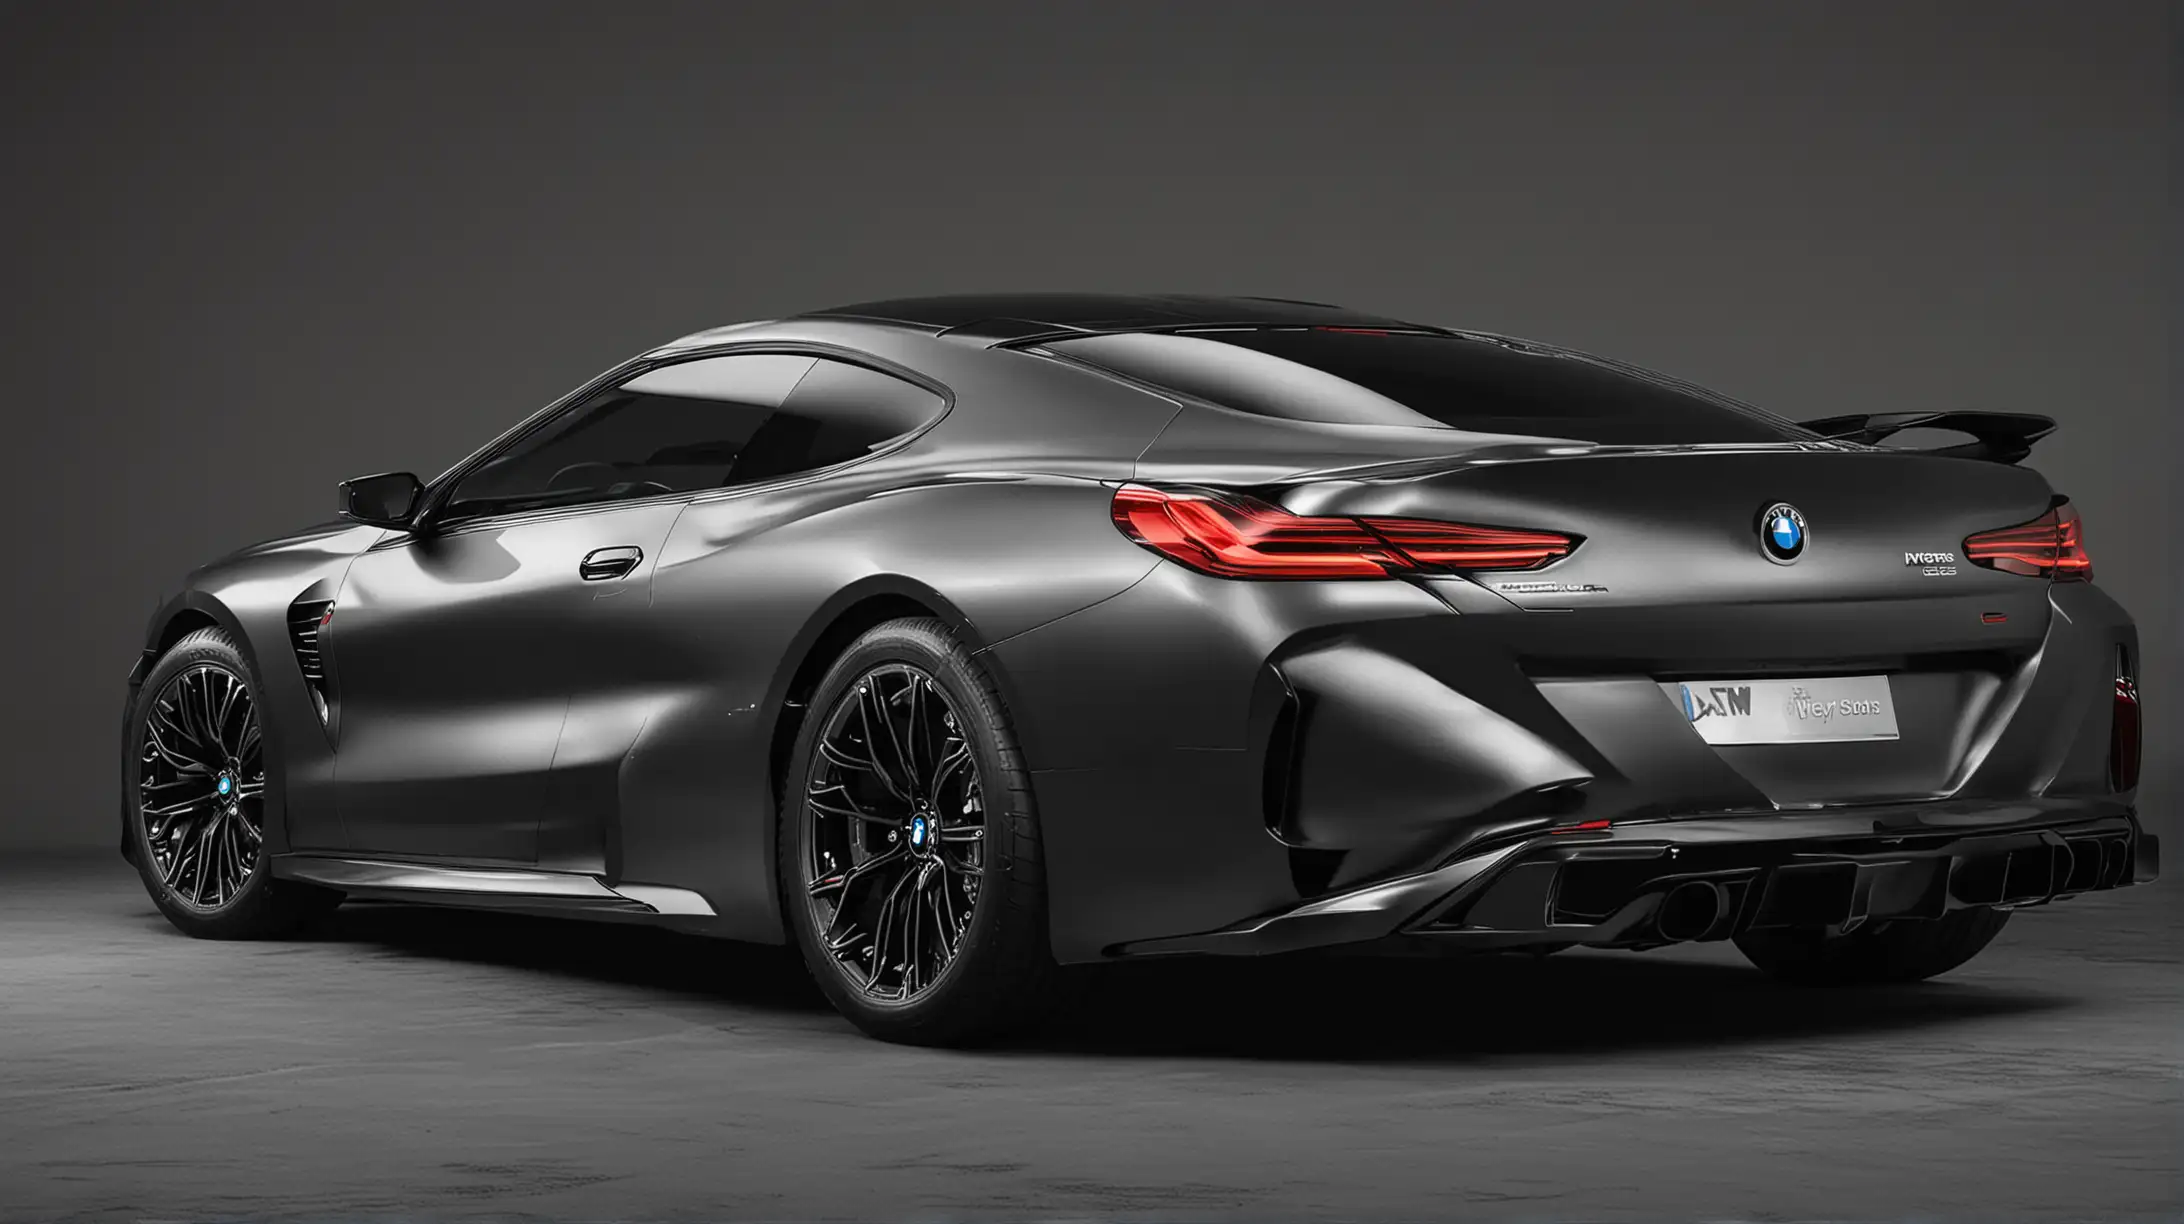 2025 BMW M8 Sport Coupe with Headlights On Sleek Black Car Rear View